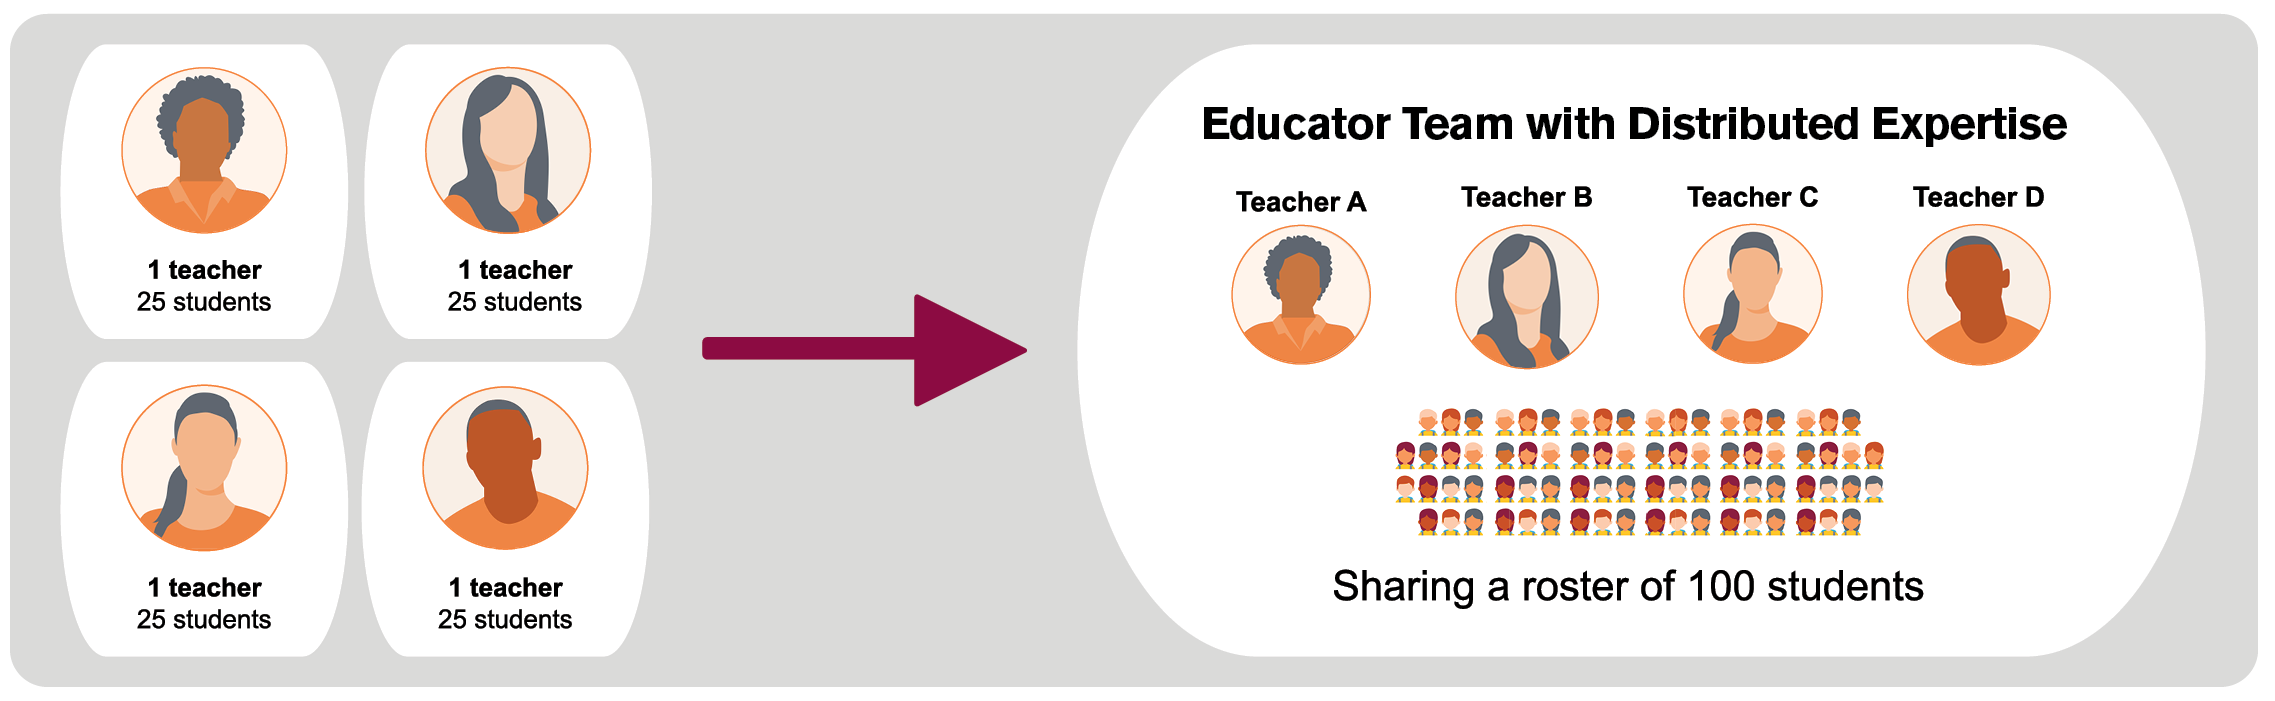 Graphic demonstrating the move from individual classrooms with one educator to a larger classroom with all educators working together